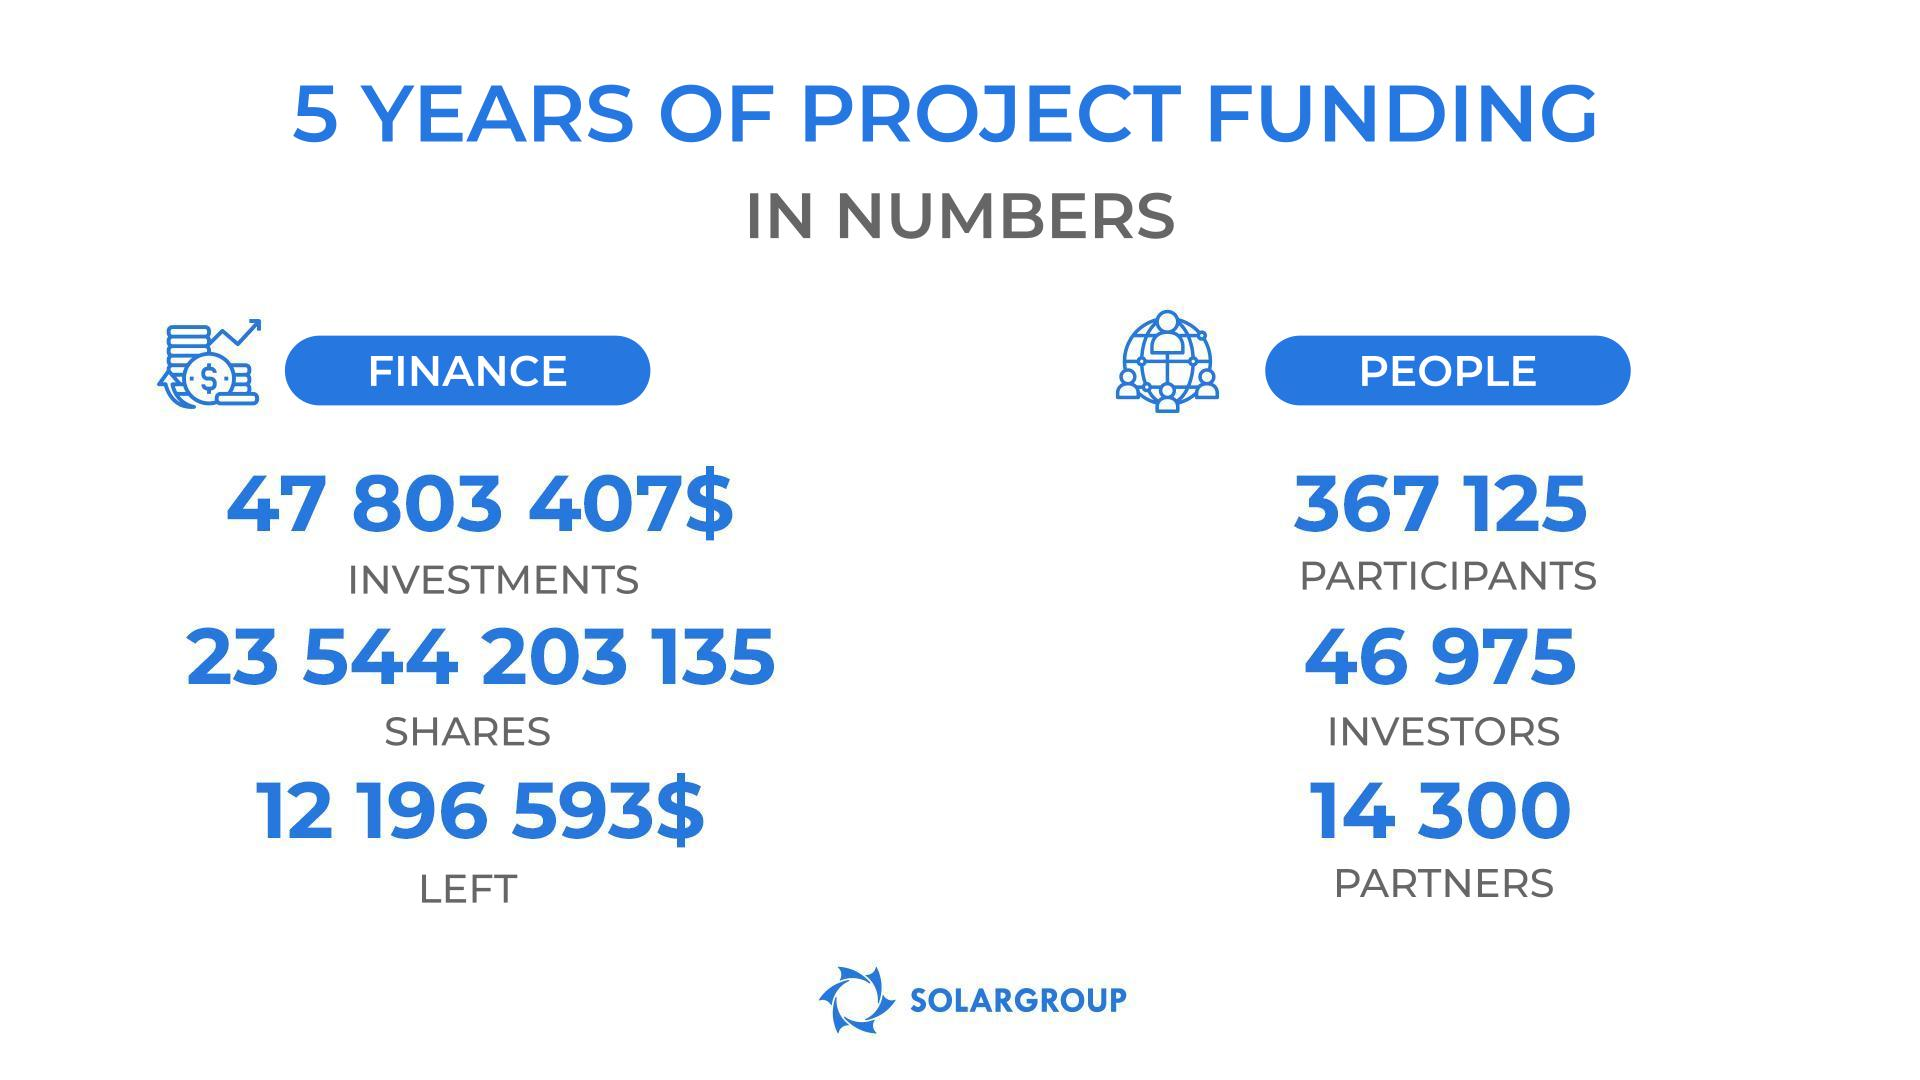 Funding results for the project "Duyunov's motors" in numbers